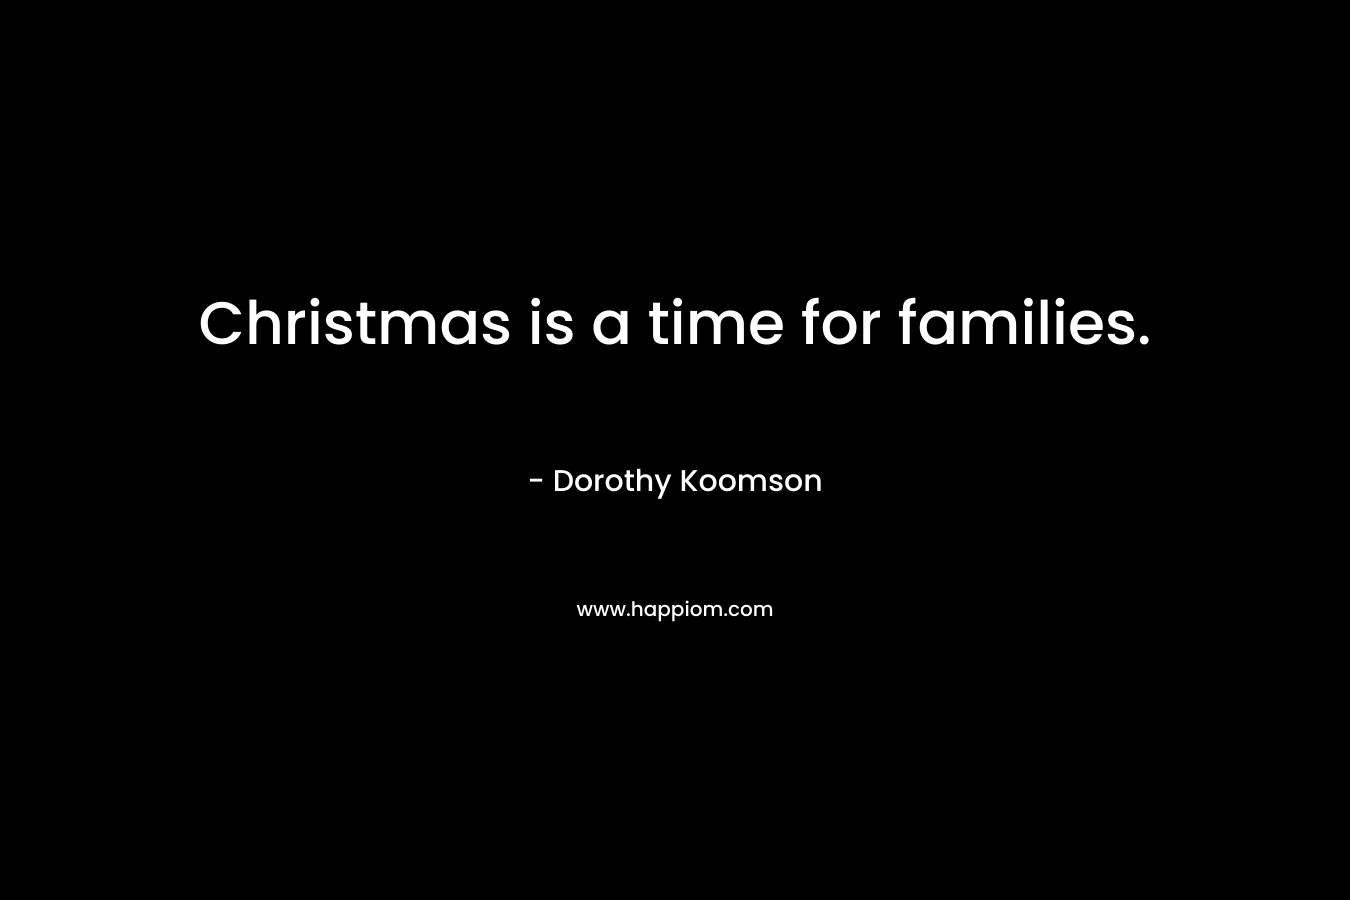 Christmas is a time for families. – Dorothy Koomson